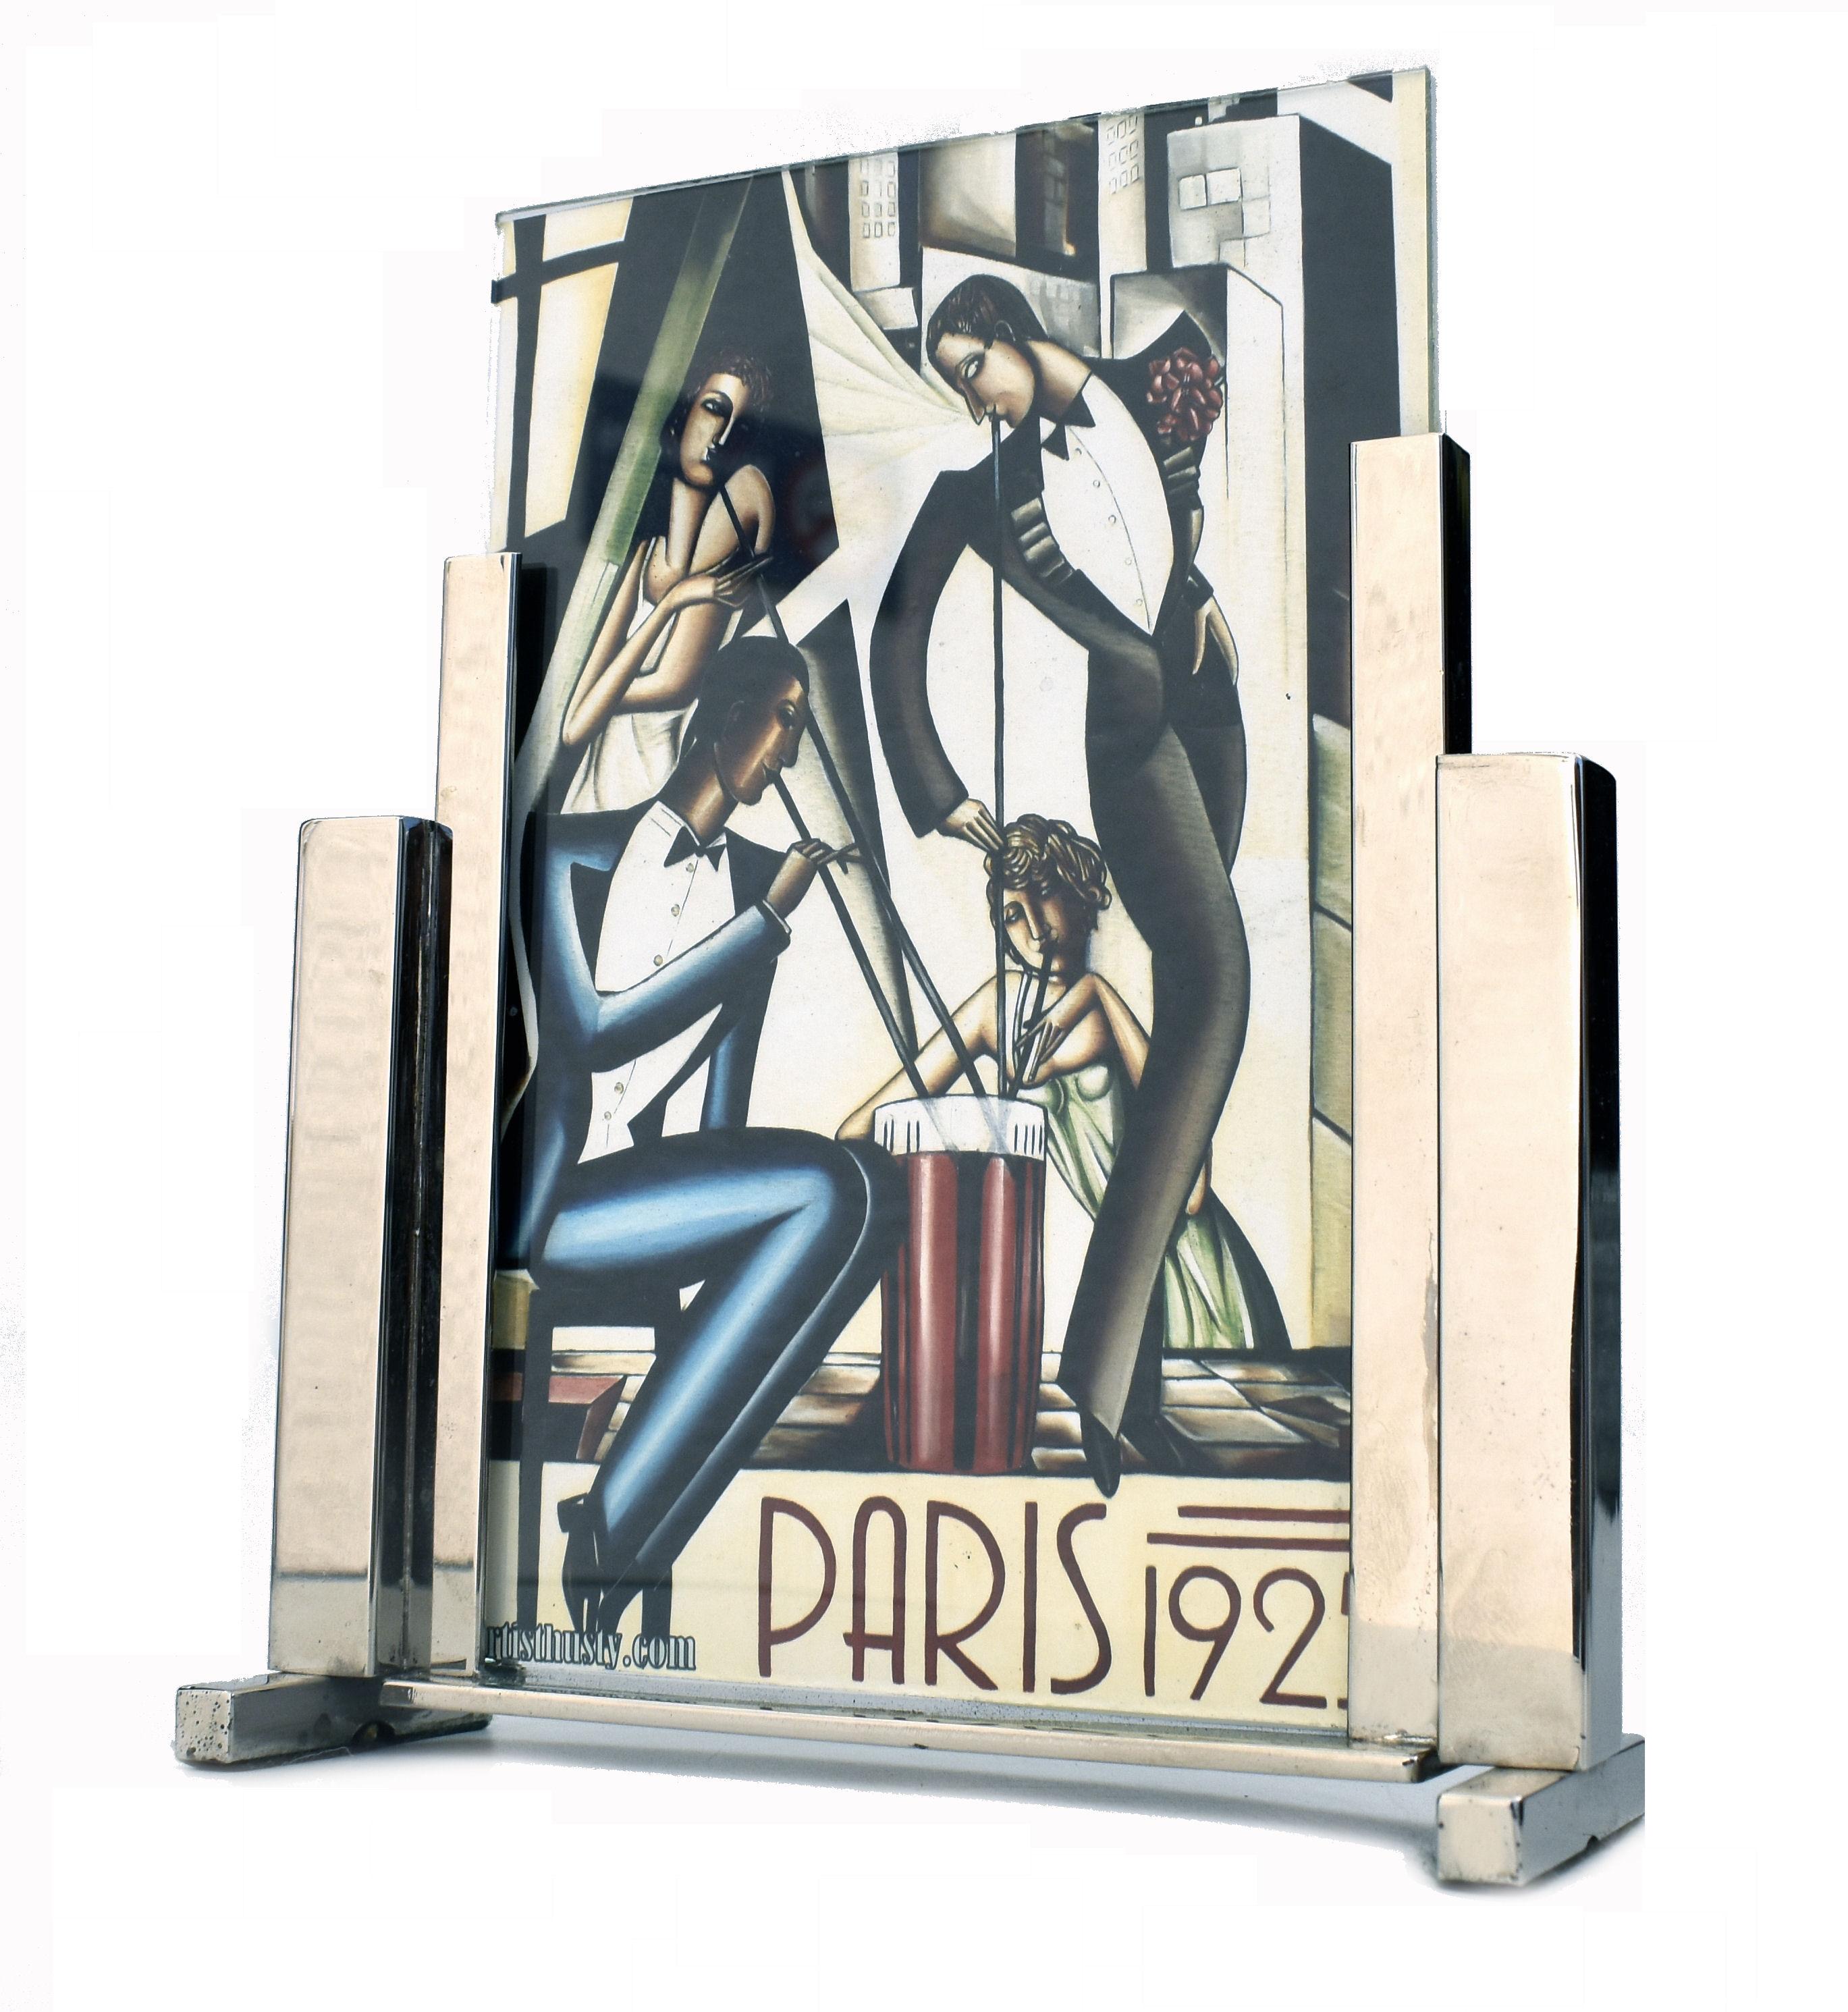 Super stylish 1930's Art Deco Modernist picture frame in chrome and glass. The frame has two pieces of glass which slot into the chrome stand allows an image to be displayed both sides of the free standing frame. Ideal size and perfect for any